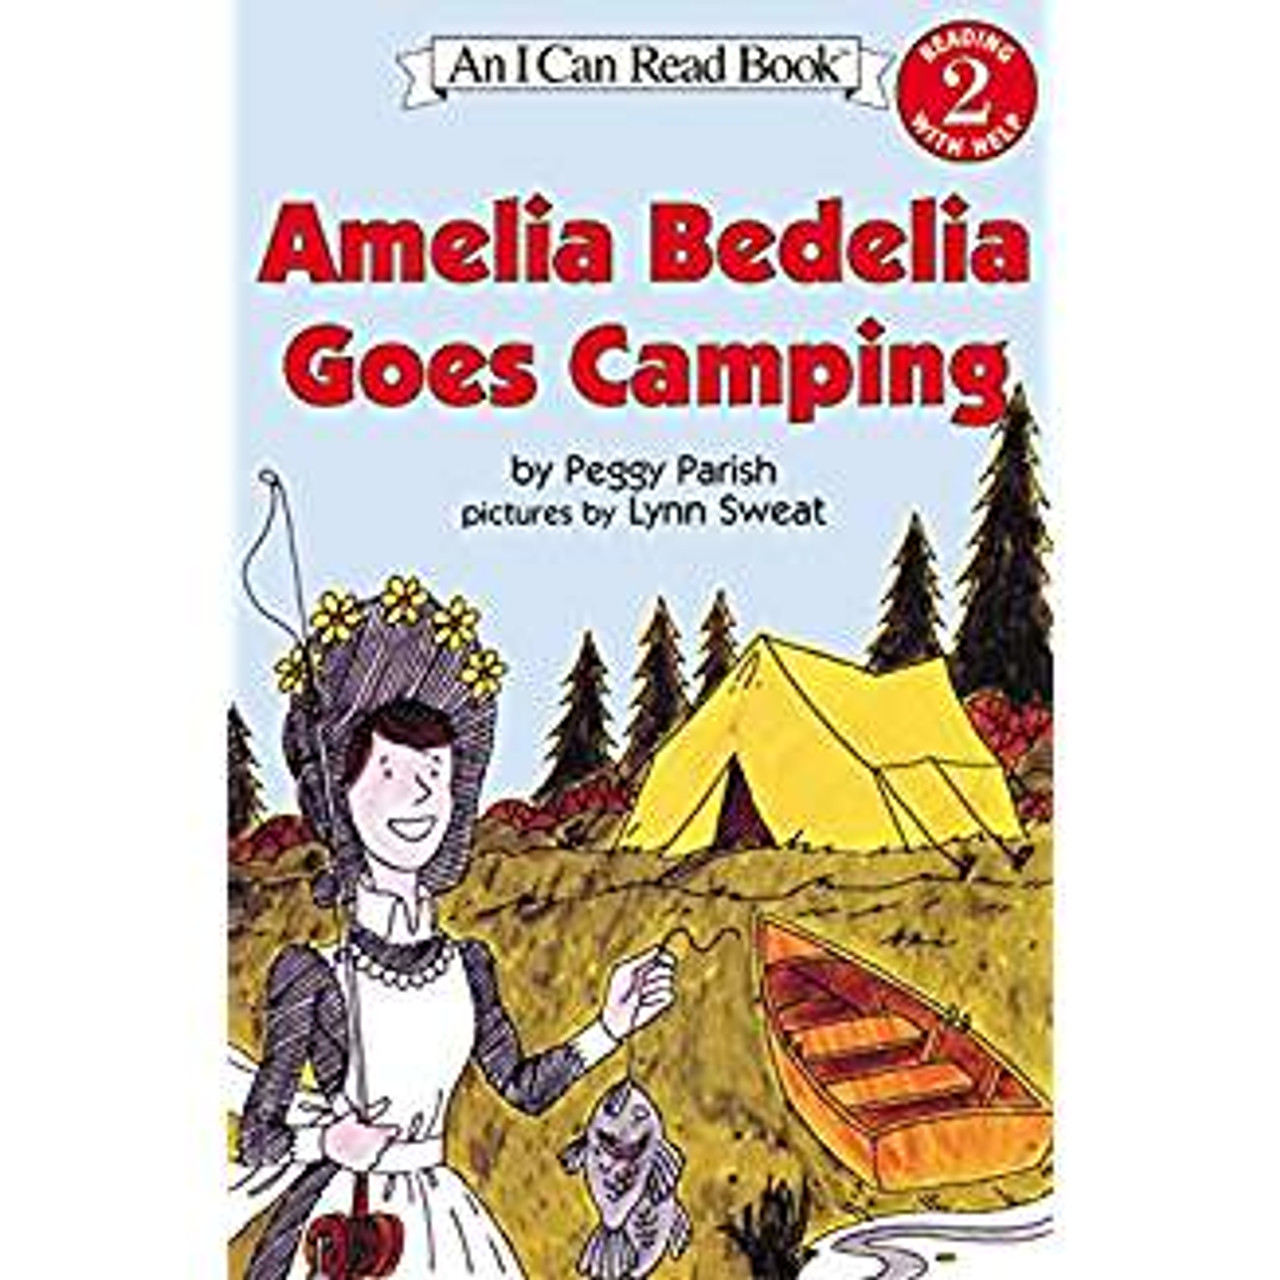 The mixed-up housekeeper goes camping for the very first time, and although she tries her best to do exactly as she's told, she makes this camping trip one hugely entertaining adventure. Now available in full color for the first time.